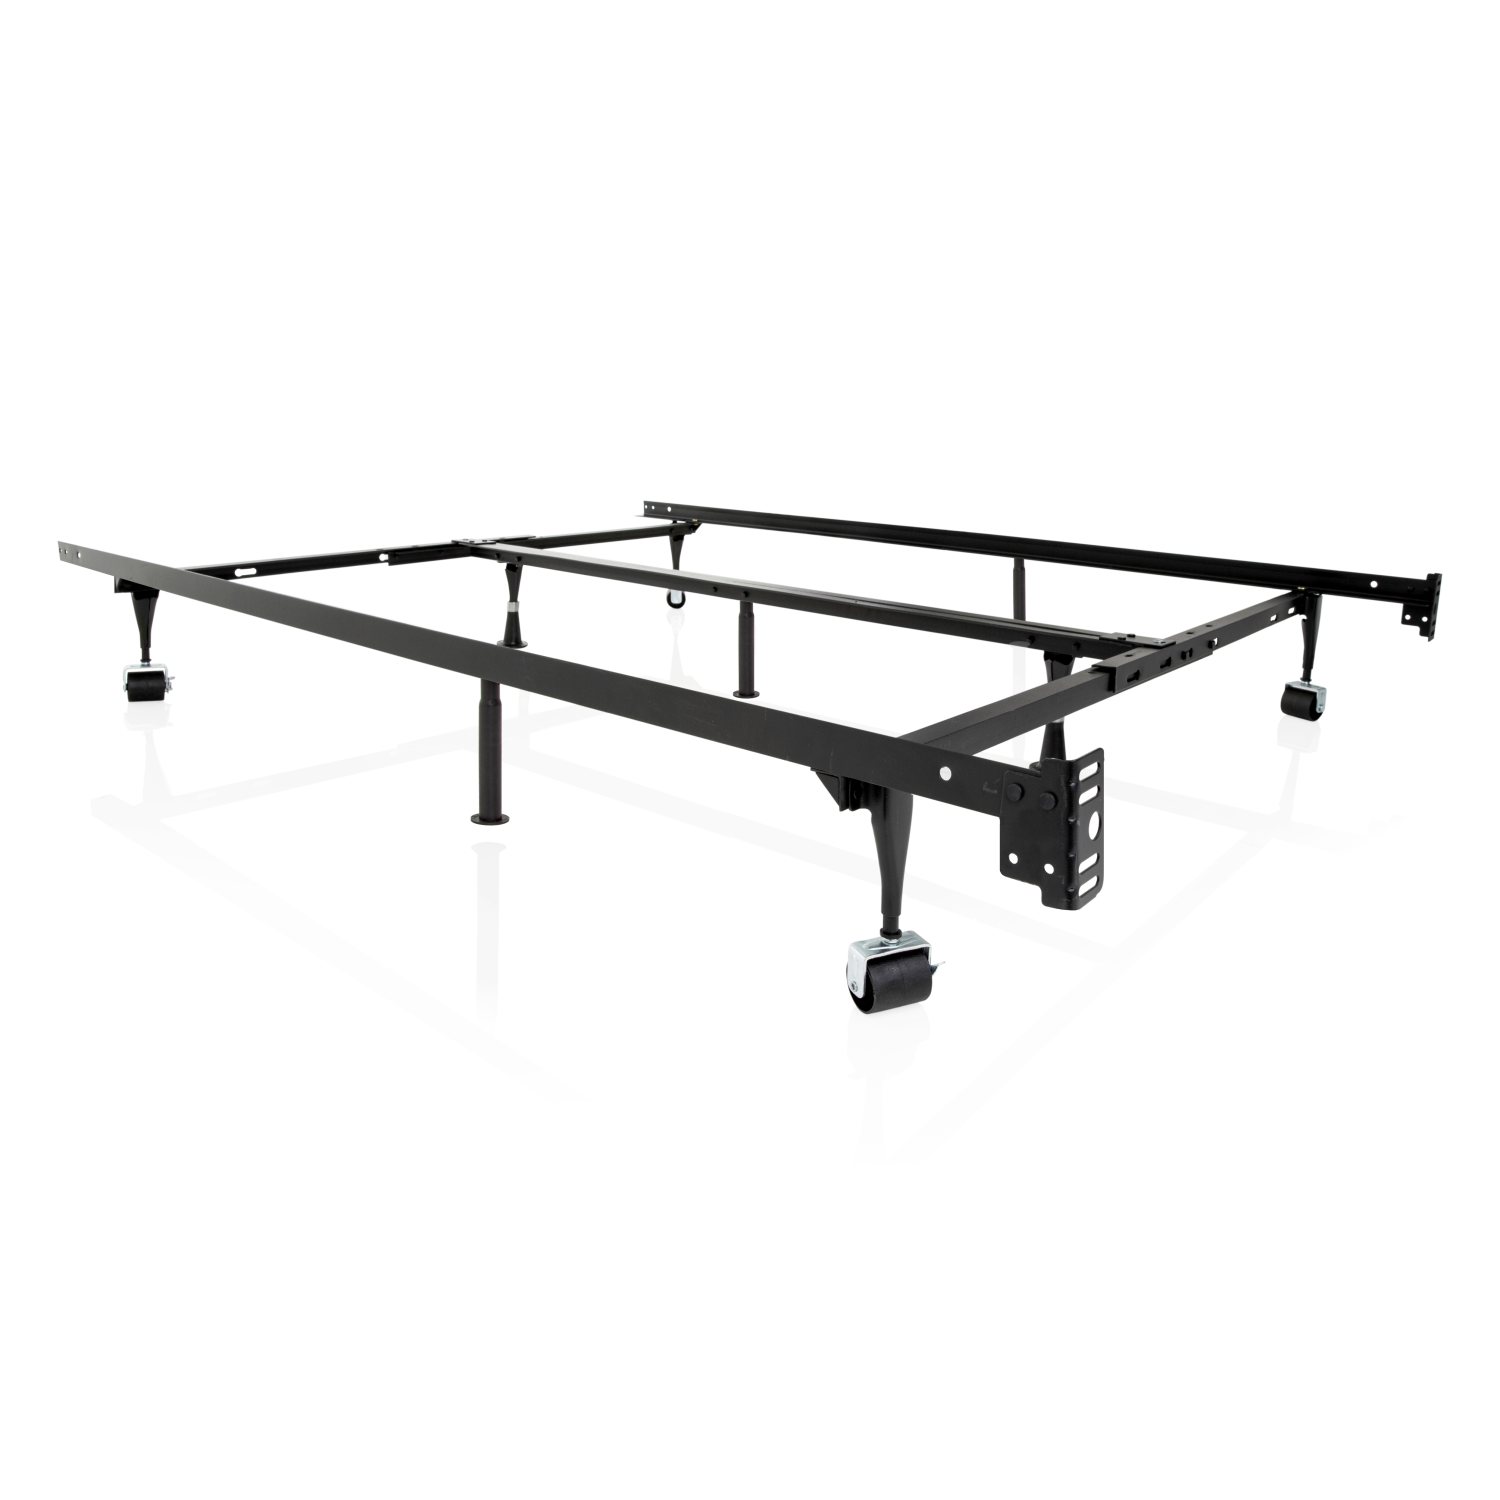 Universal Bed Frame Image with Rollers